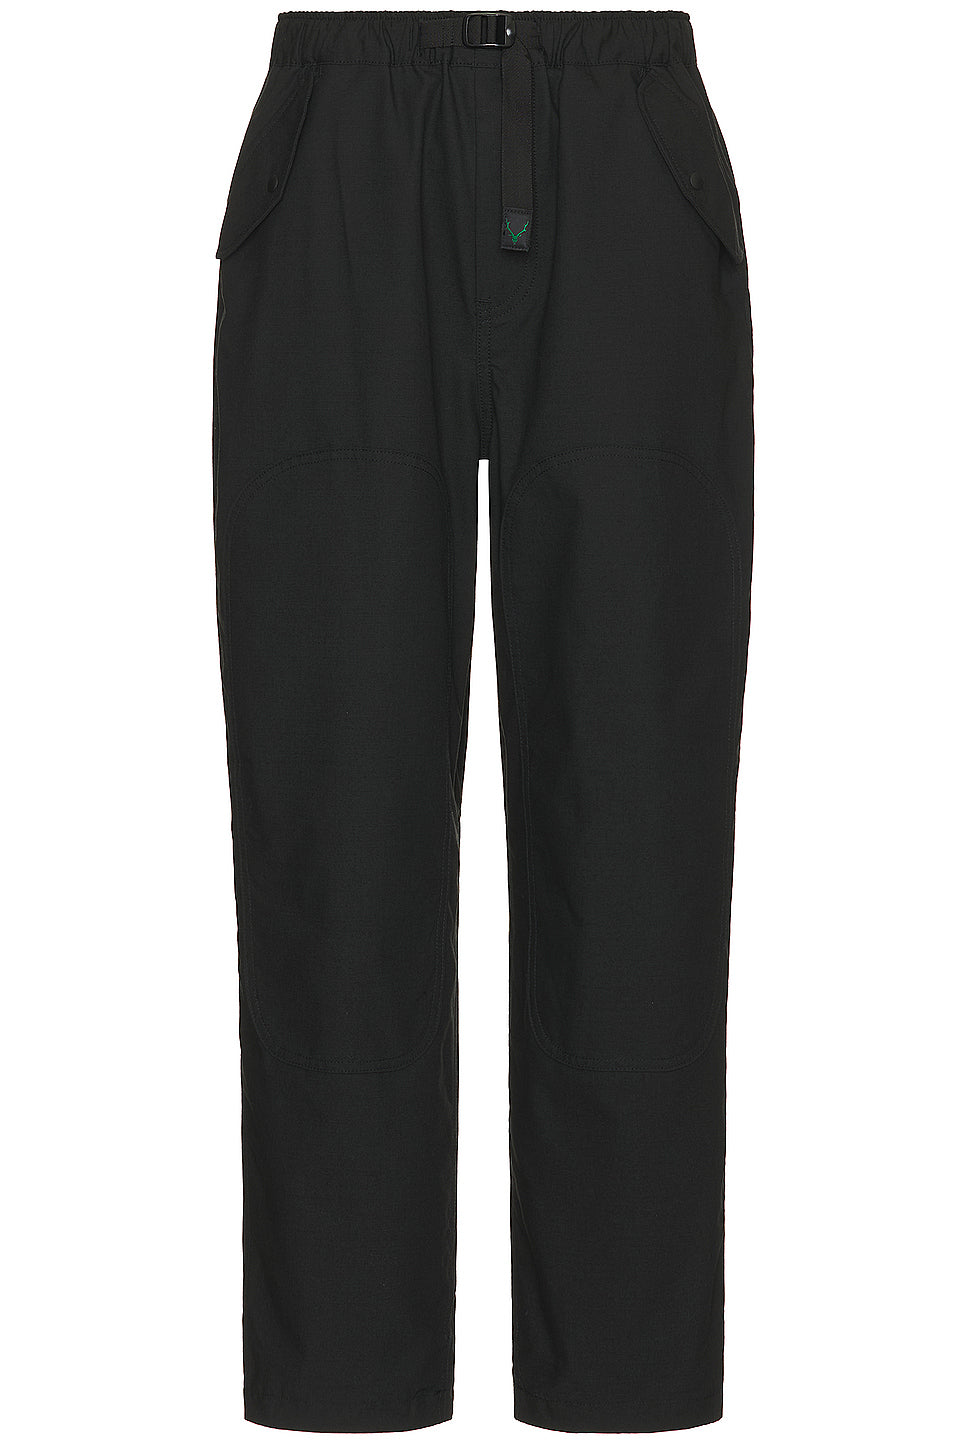 Belted Double Knee Pant Cmo Ripstop